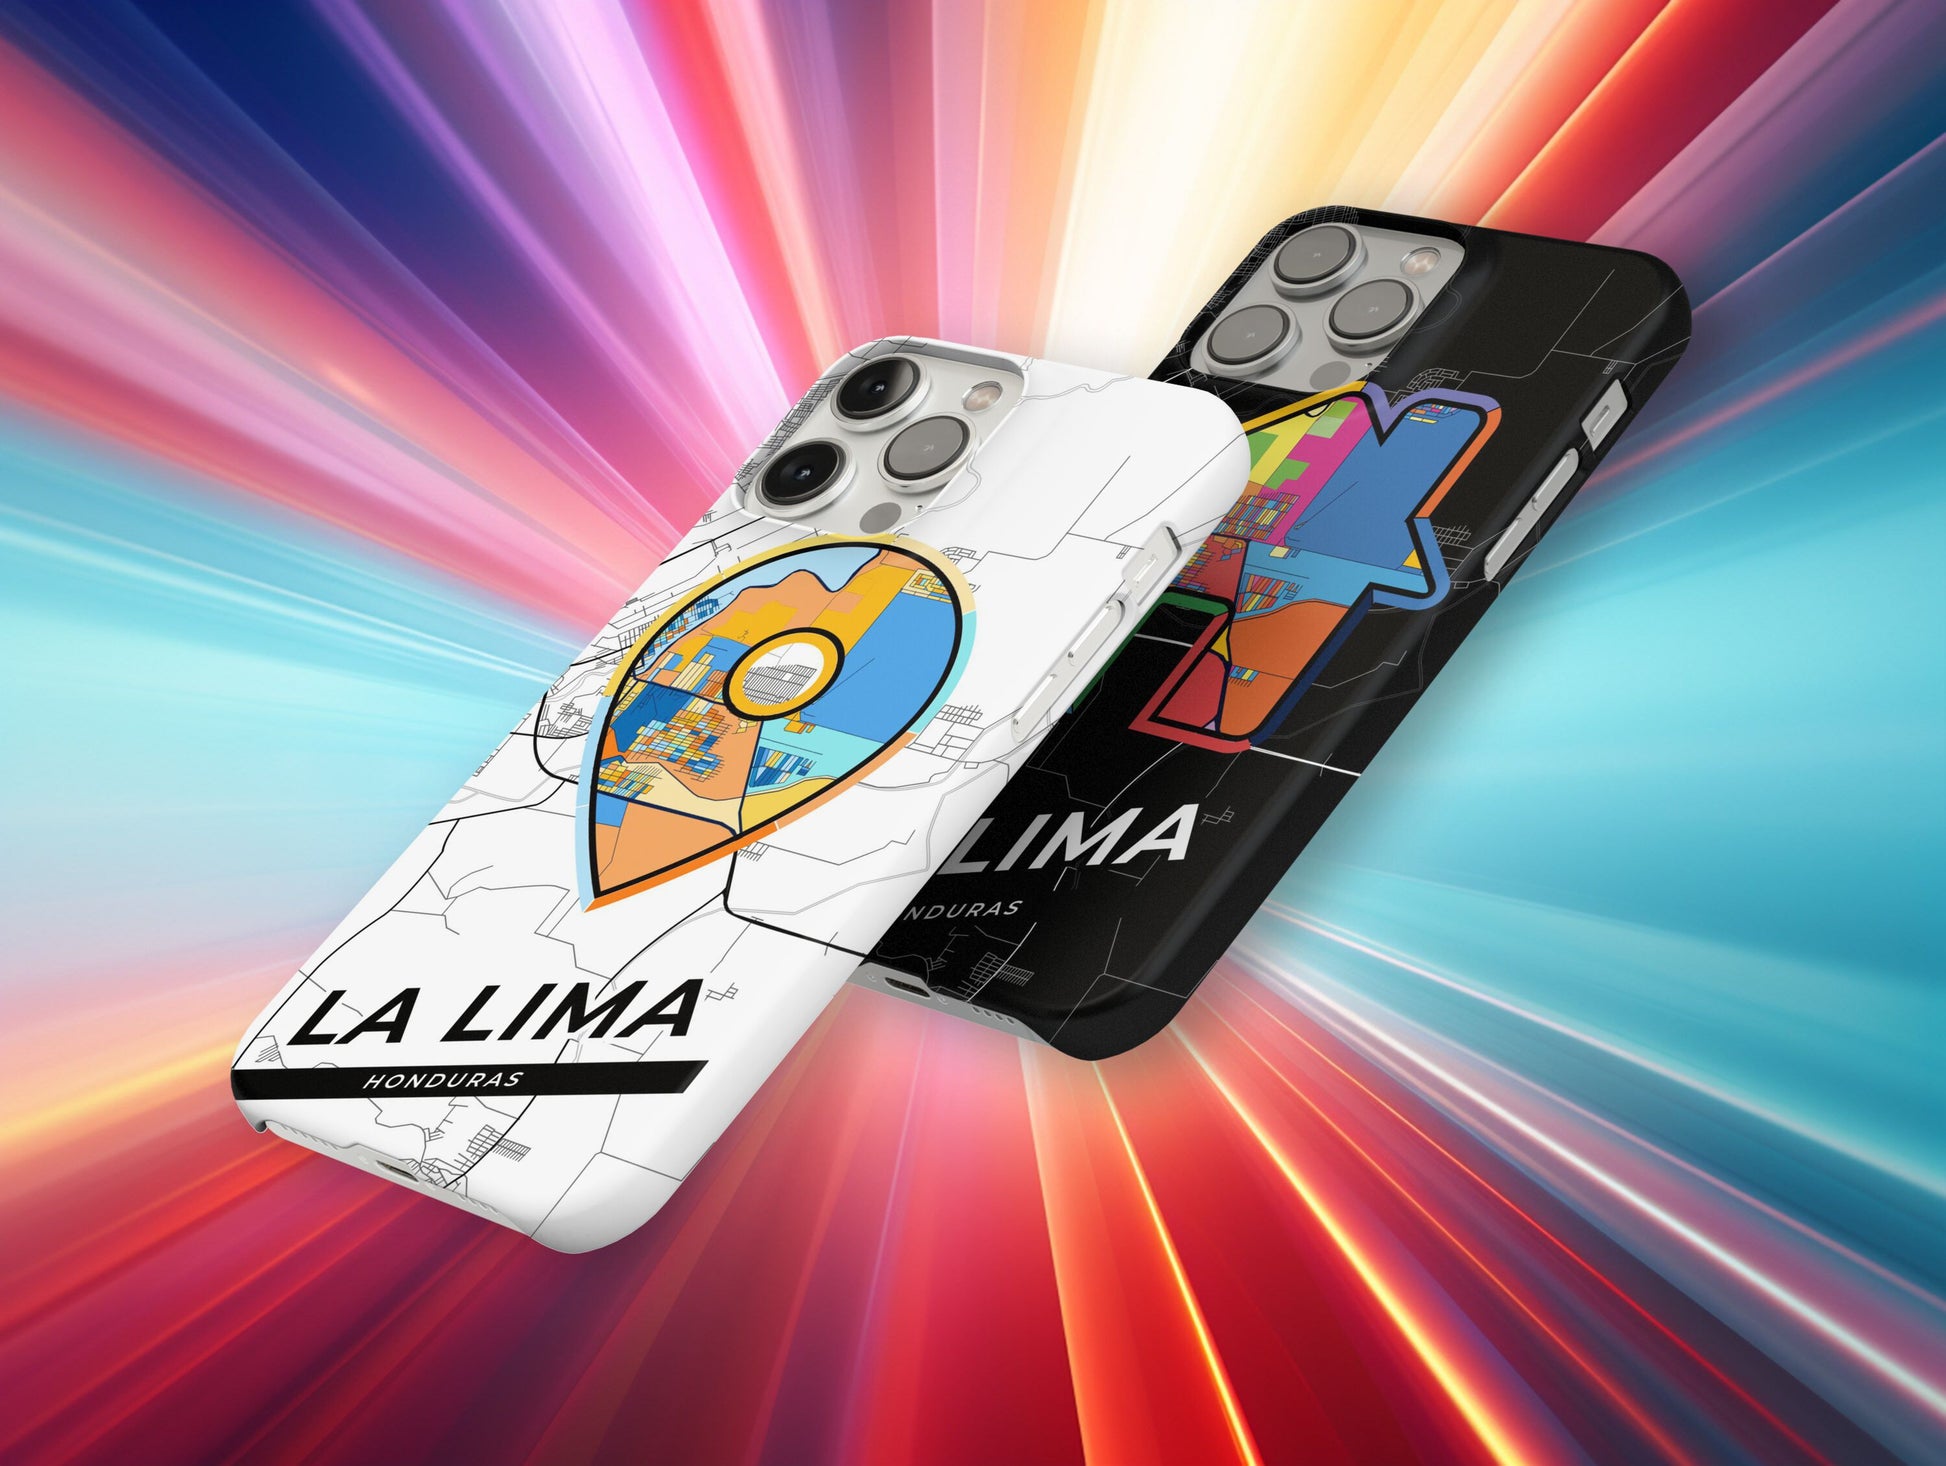 La Lima Honduras slim phone case with colorful icon. Birthday, wedding or housewarming gift. Couple match cases.